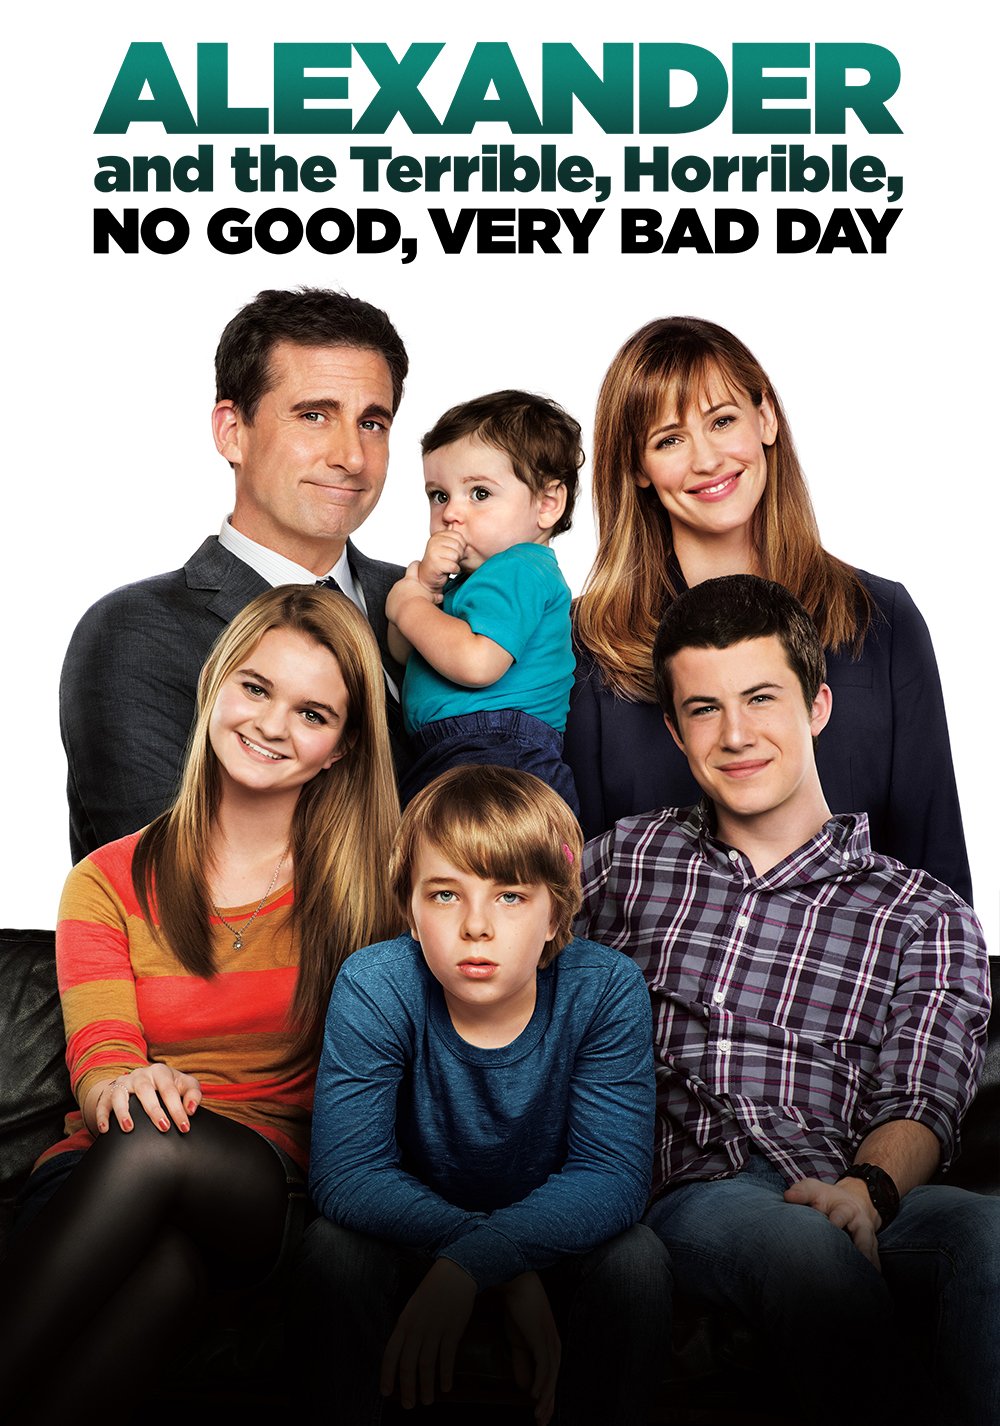 alexander-and-the-terrible-horrible-no-good-very-bad-day-movie